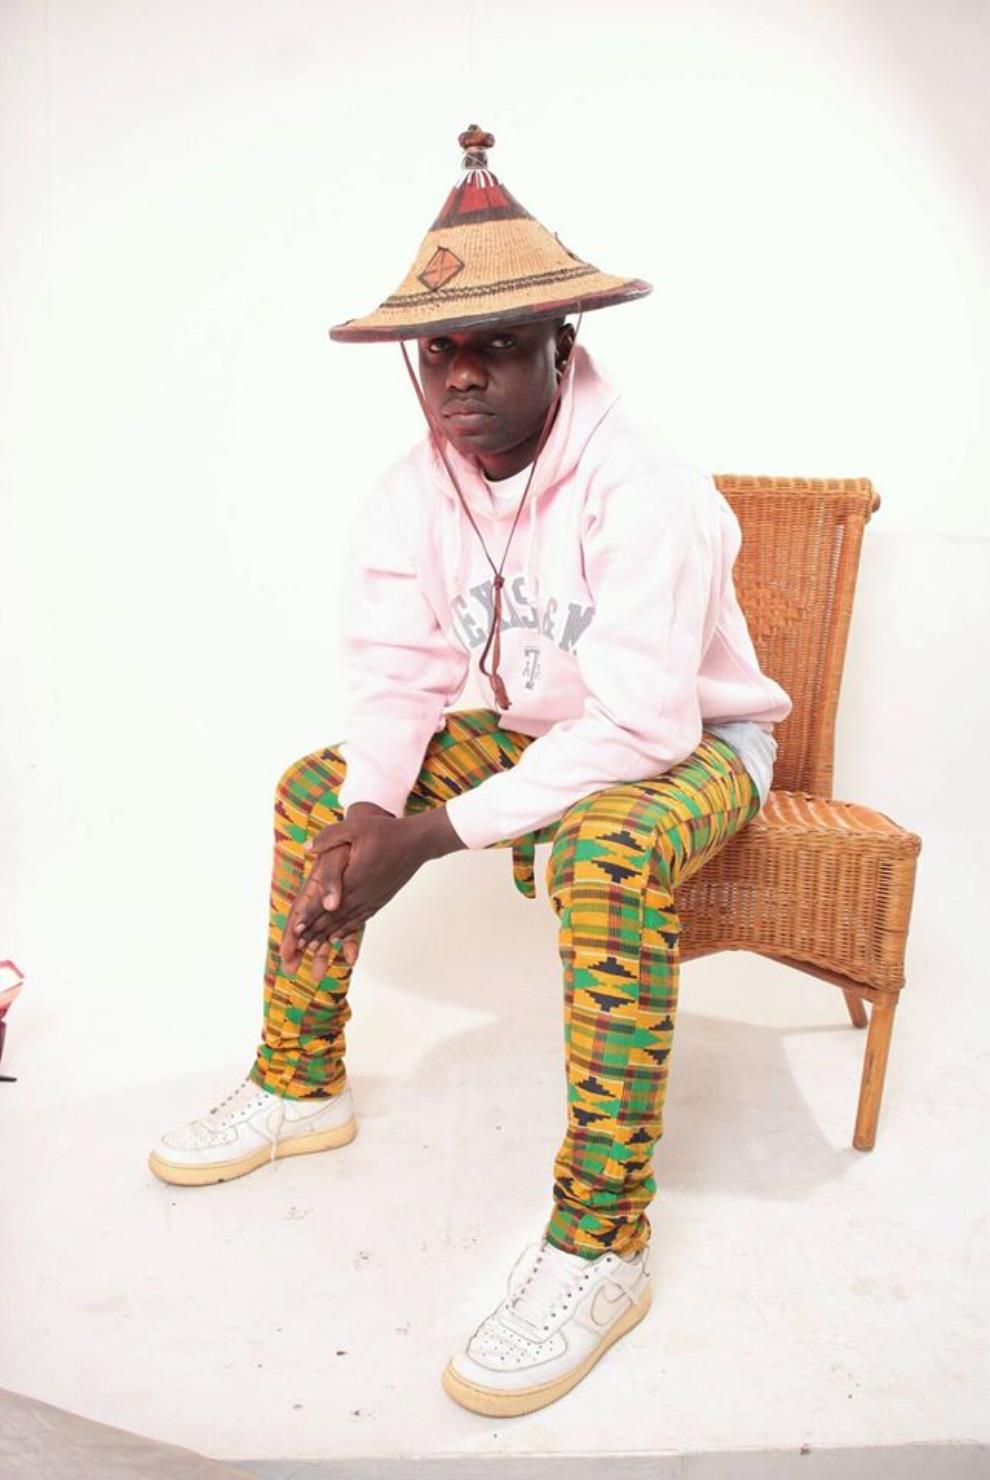 I Wish Budding Musicians Will Visit, Learn From Veteran Musicians – Kwame Ghana